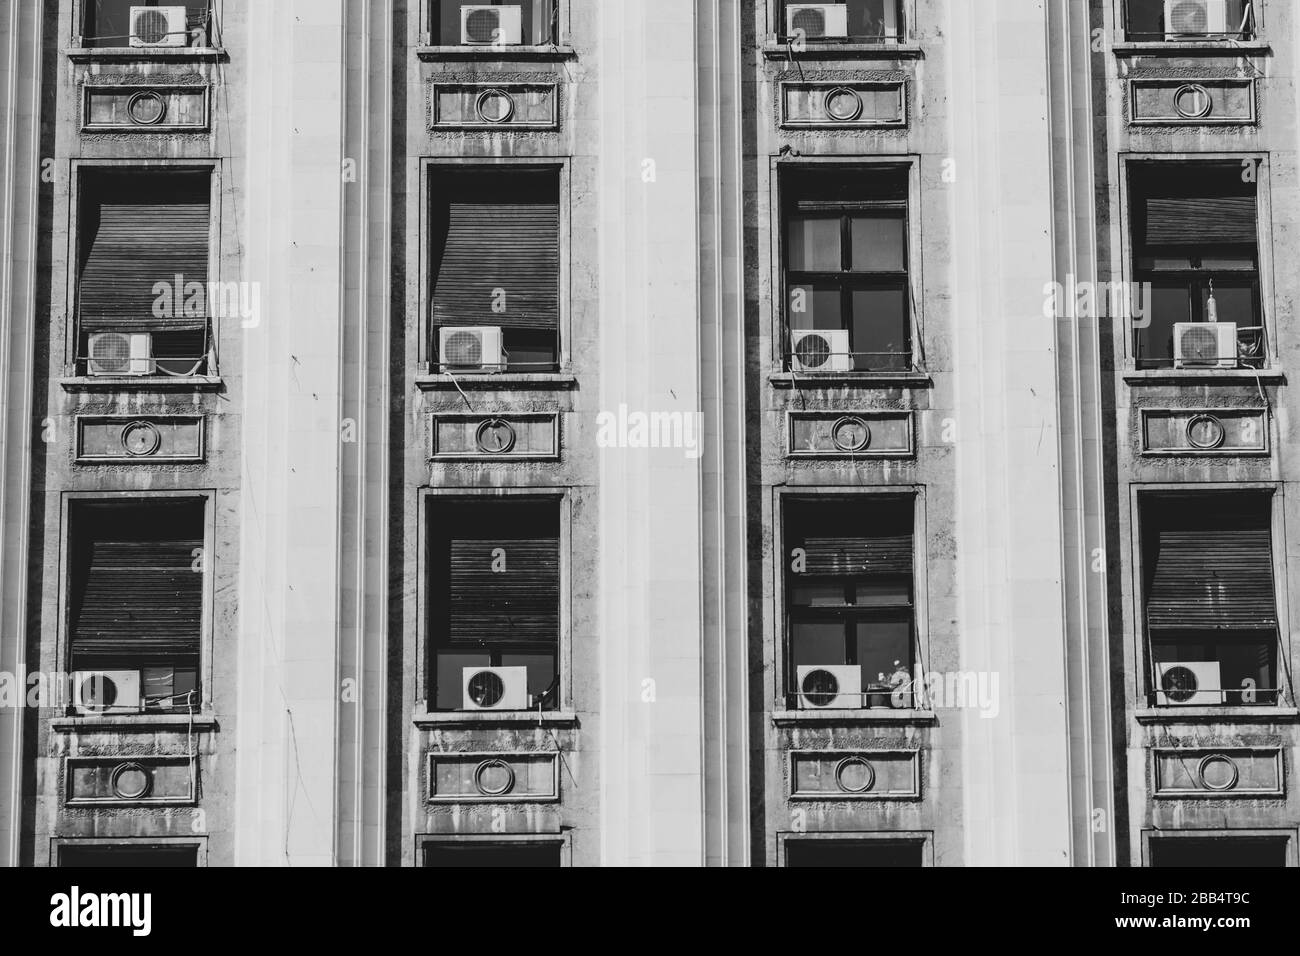 The exterior of an old soviet era style building with window air conditioning machines. Stock Photo